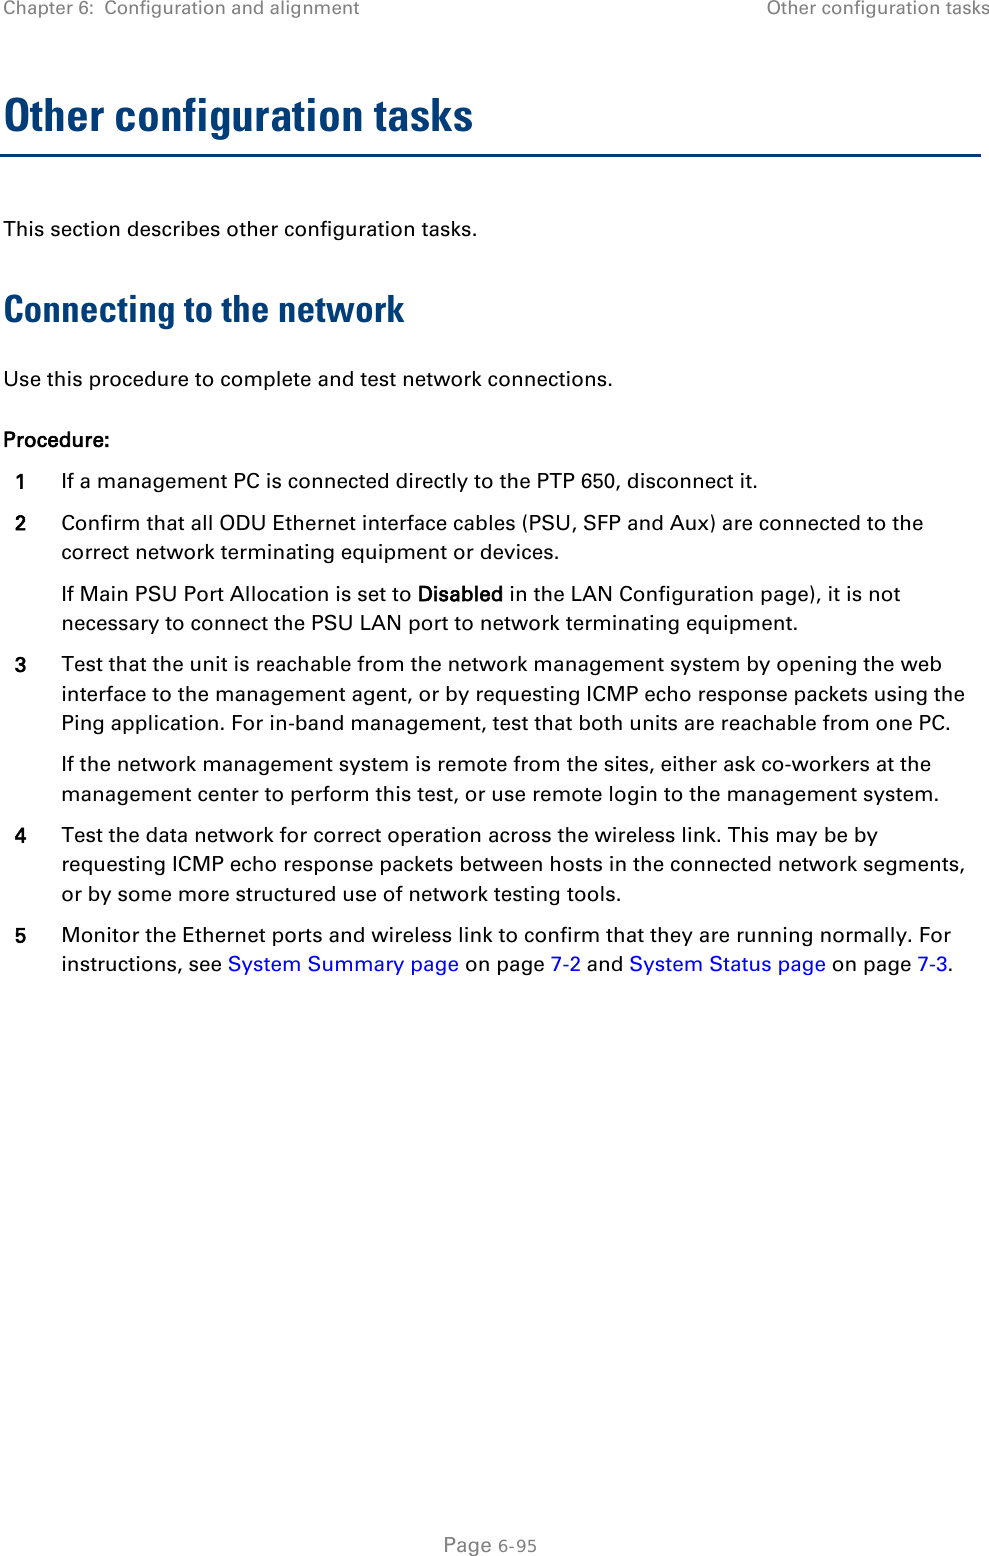 Chapter 6:  Configuration and alignment Other configuration tasks  Other configuration tasks This section describes other configuration tasks. Connecting to the network Use this procedure to complete and test network connections. Procedure: 1 If a management PC is connected directly to the PTP 650, disconnect it. 2 Confirm that all ODU Ethernet interface cables (PSU, SFP and Aux) are connected to the correct network terminating equipment or devices. If Main PSU Port Allocation is set to Disabled in the LAN Configuration page), it is not necessary to connect the PSU LAN port to network terminating equipment. 3 Test that the unit is reachable from the network management system by opening the web interface to the management agent, or by requesting ICMP echo response packets using the Ping application. For in-band management, test that both units are reachable from one PC. If the network management system is remote from the sites, either ask co-workers at the management center to perform this test, or use remote login to the management system. 4 Test the data network for correct operation across the wireless link. This may be by requesting ICMP echo response packets between hosts in the connected network segments, or by some more structured use of network testing tools. 5 Monitor the Ethernet ports and wireless link to confirm that they are running normally. For instructions, see System Summary page on page 7-2 and System Status page on page 7-3.   Page 6-95 